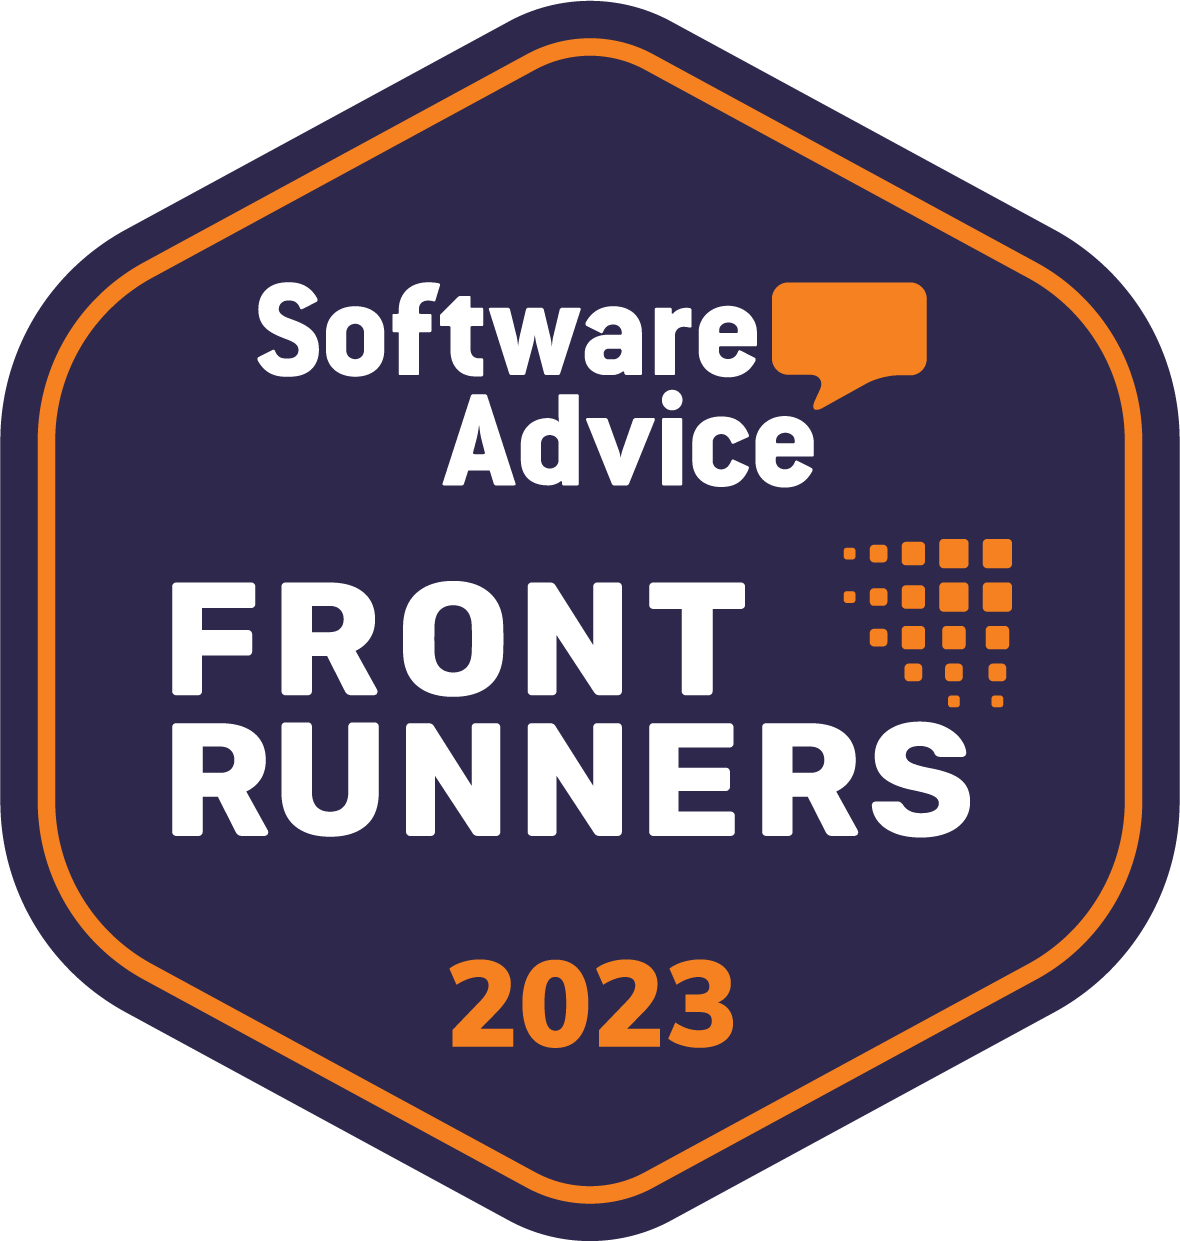 2023 Software Advice Frontrunners Image